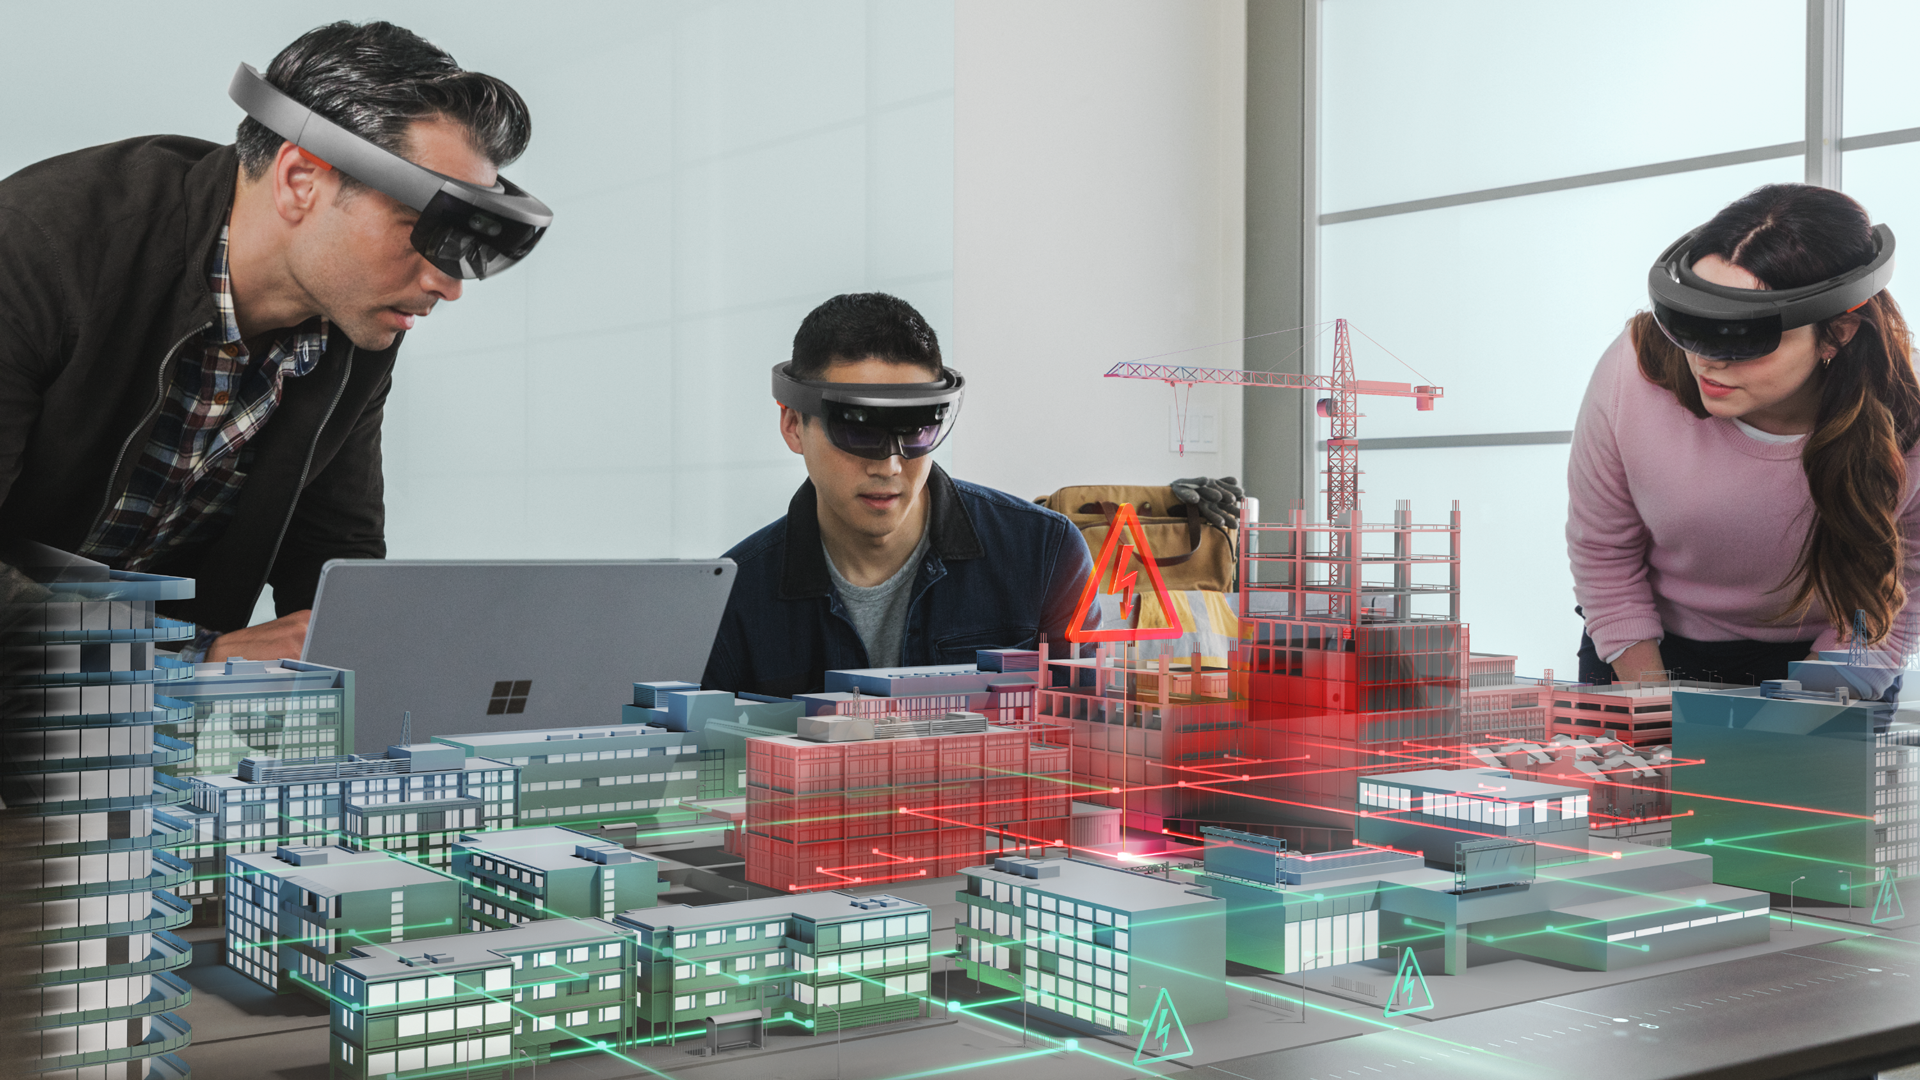 Three people wearing HoloLens looking at a virtual city on a table